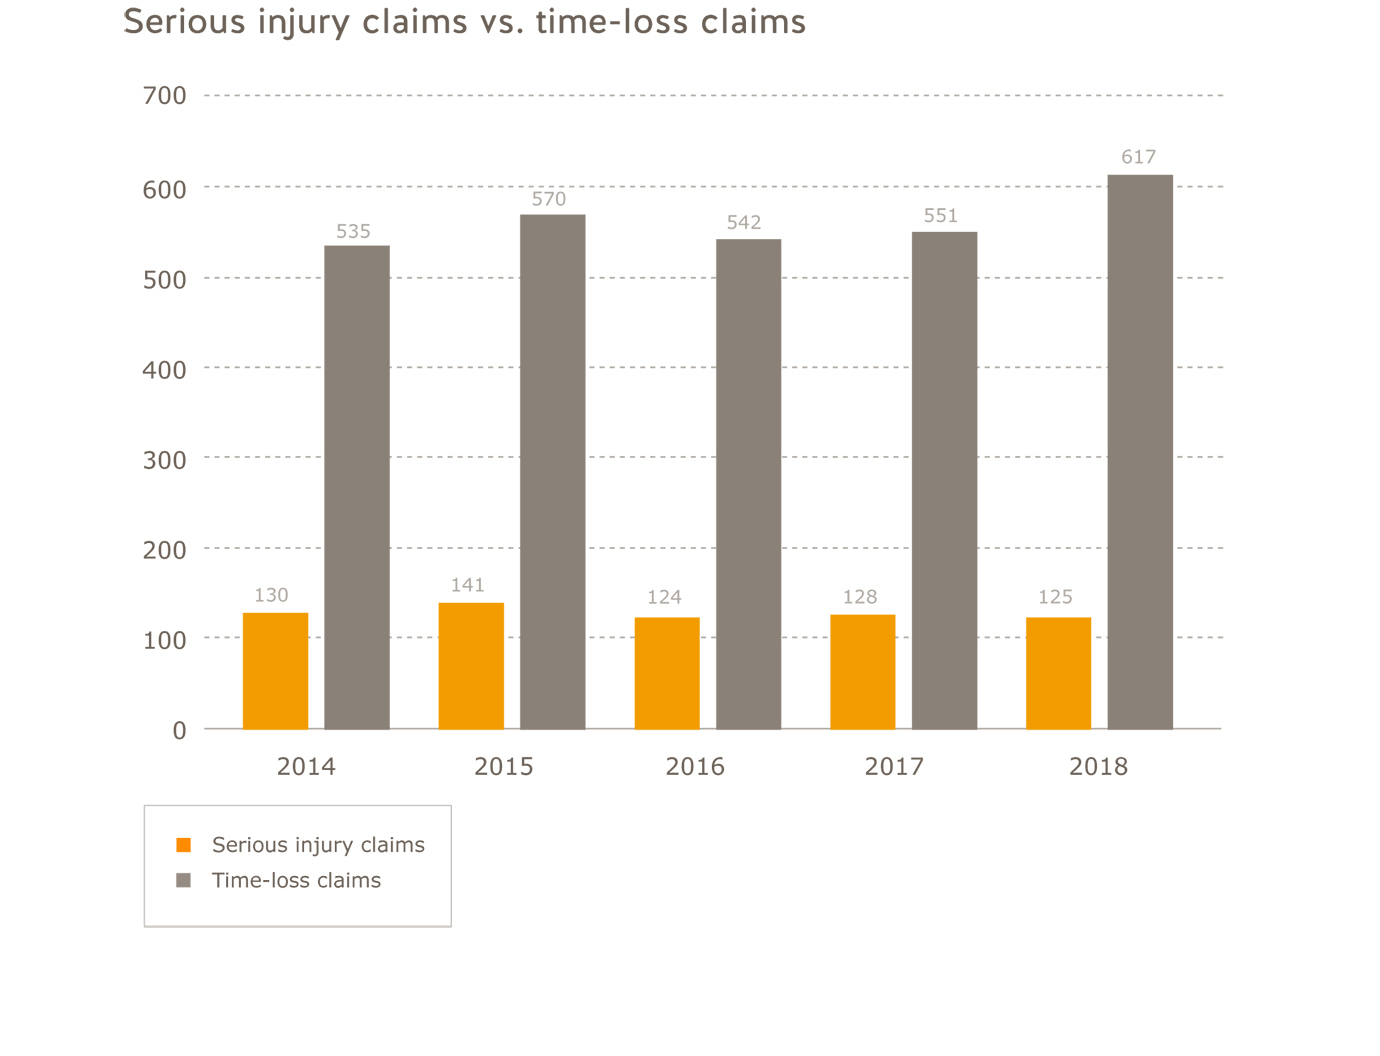 Agriculture sector serious injury claims vs. time-loss claims for 2014 to 2018. Serious injury claims=2014=130; 2015=141; 2016=124; 2017=128; 2018=125. Time-loss claims=2014=535; 2015=570; 2016=542; 2017=551; 2018=617.